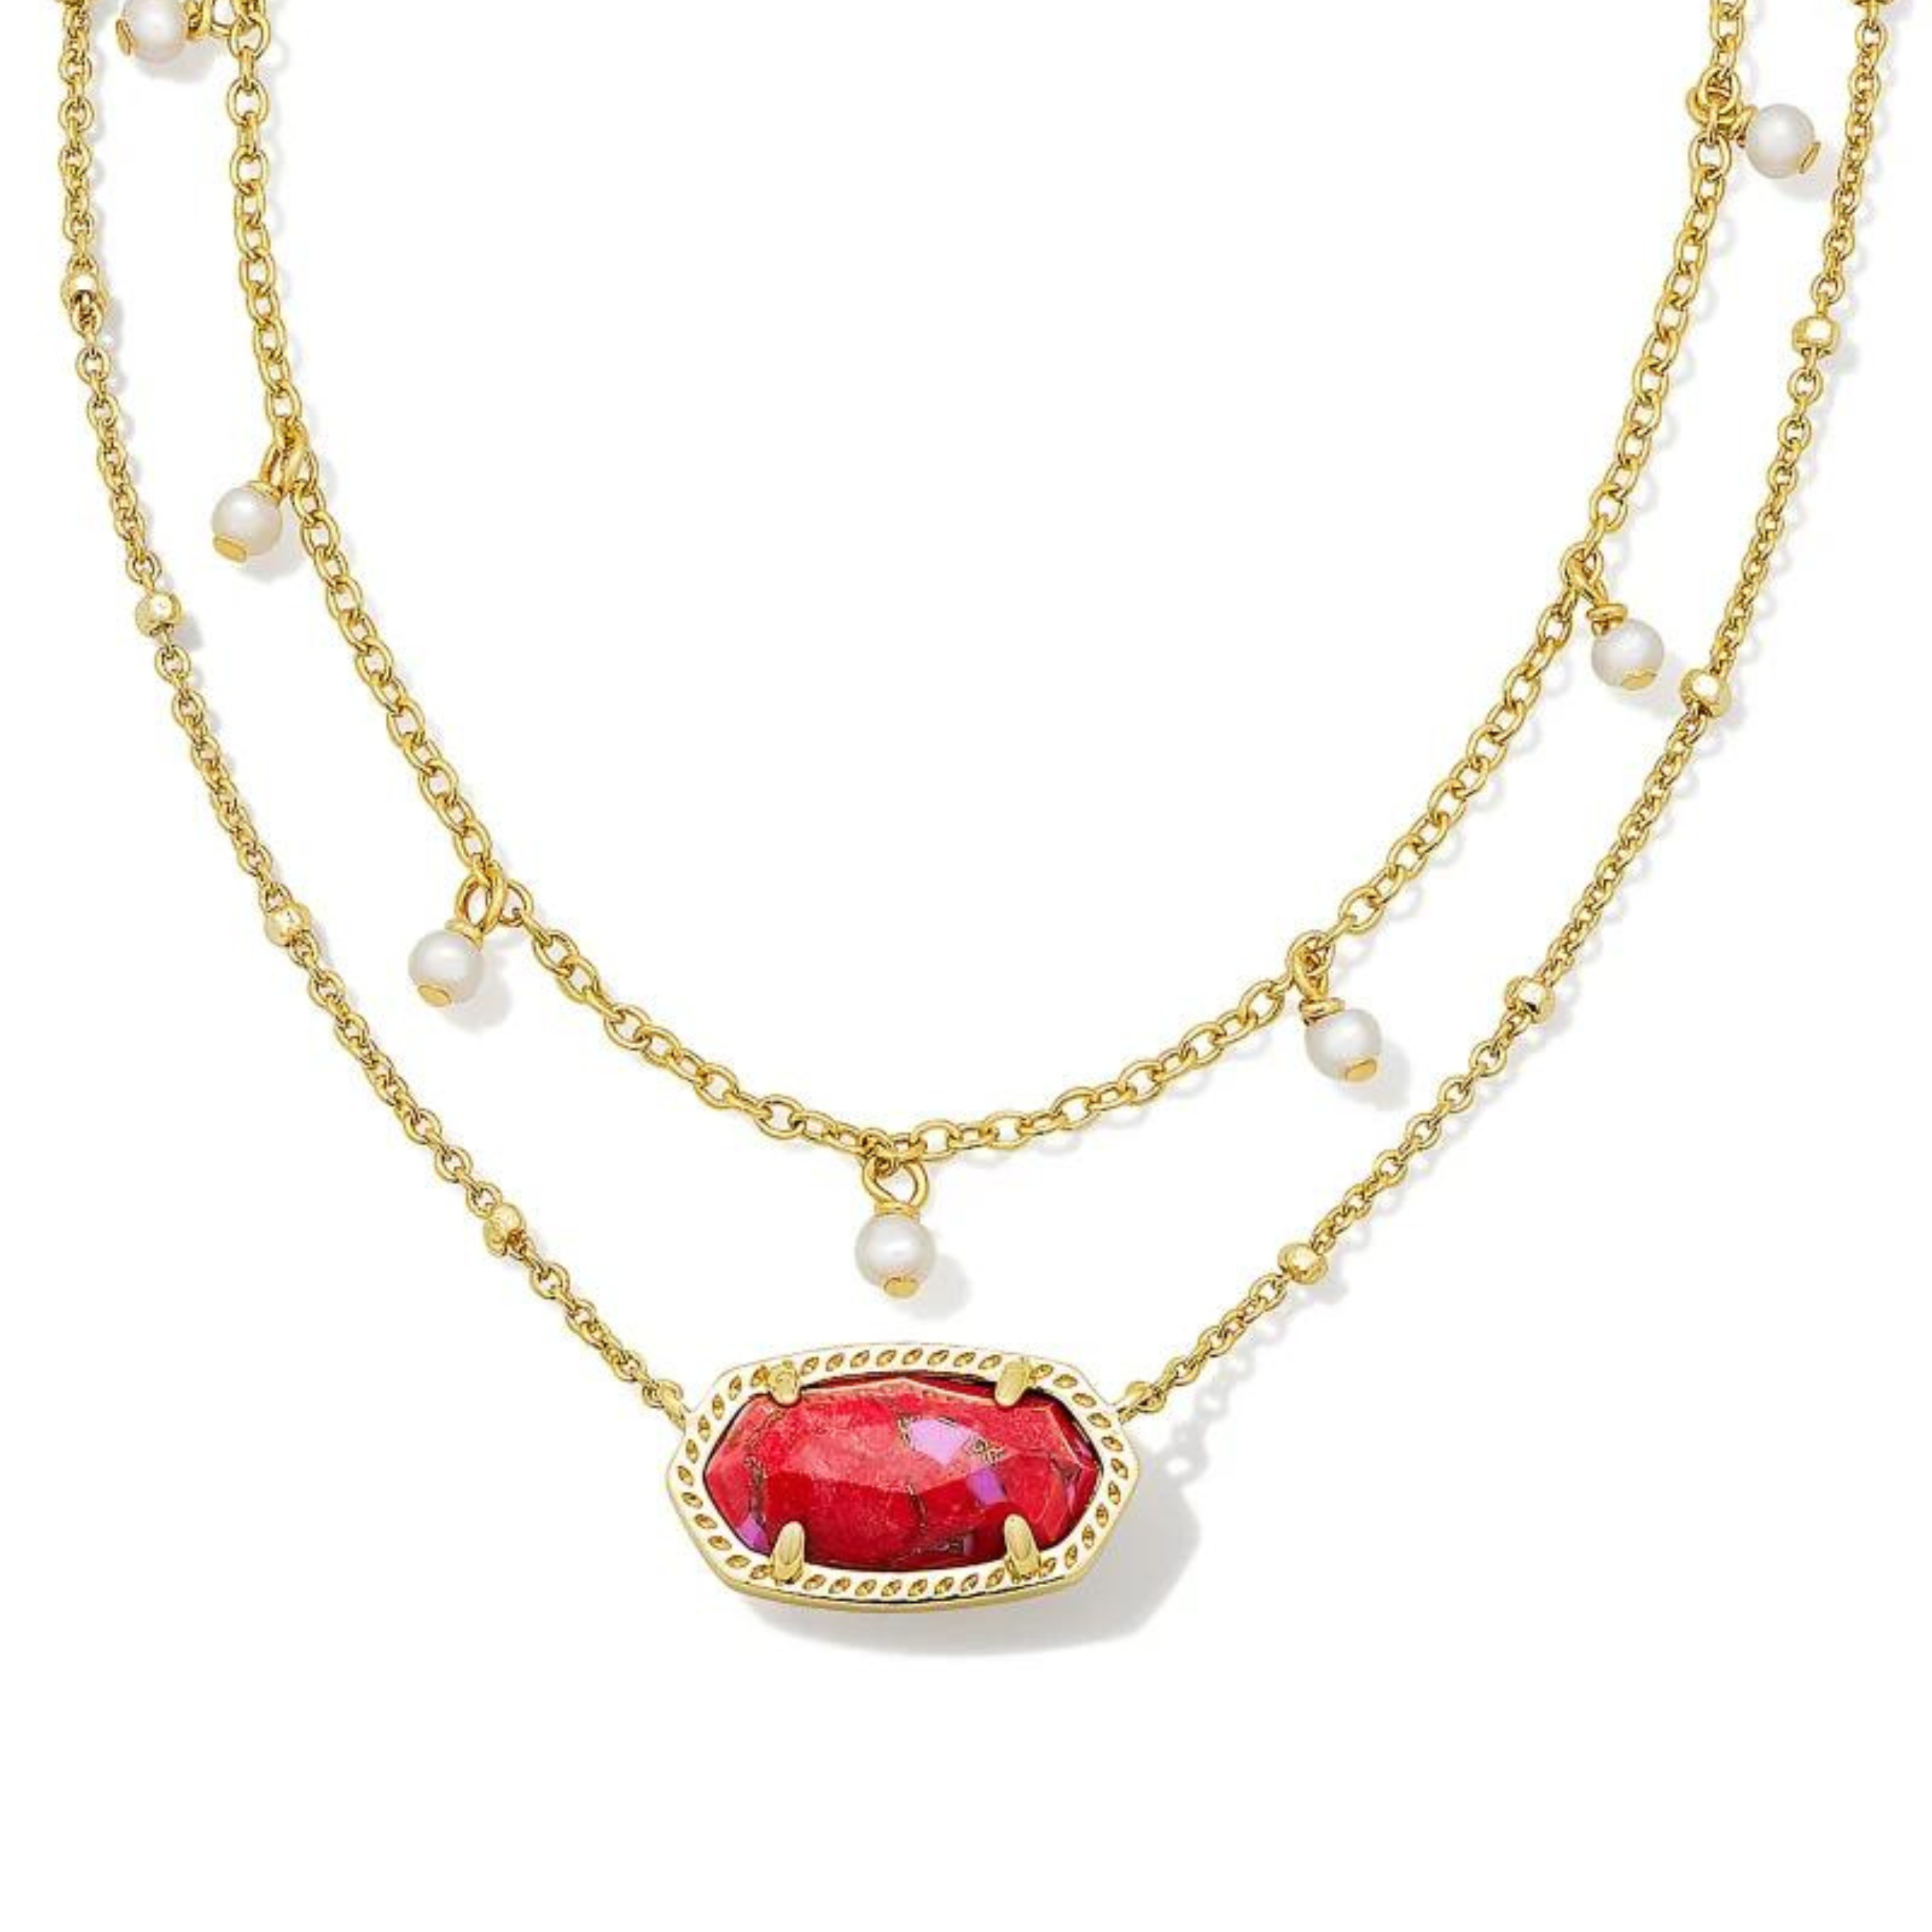 Kendra Scott | Elisa Gold Pearl Multi Strand Necklace in Bronze Veined Red Fuchsia Magnesite. Pictured on a white background.